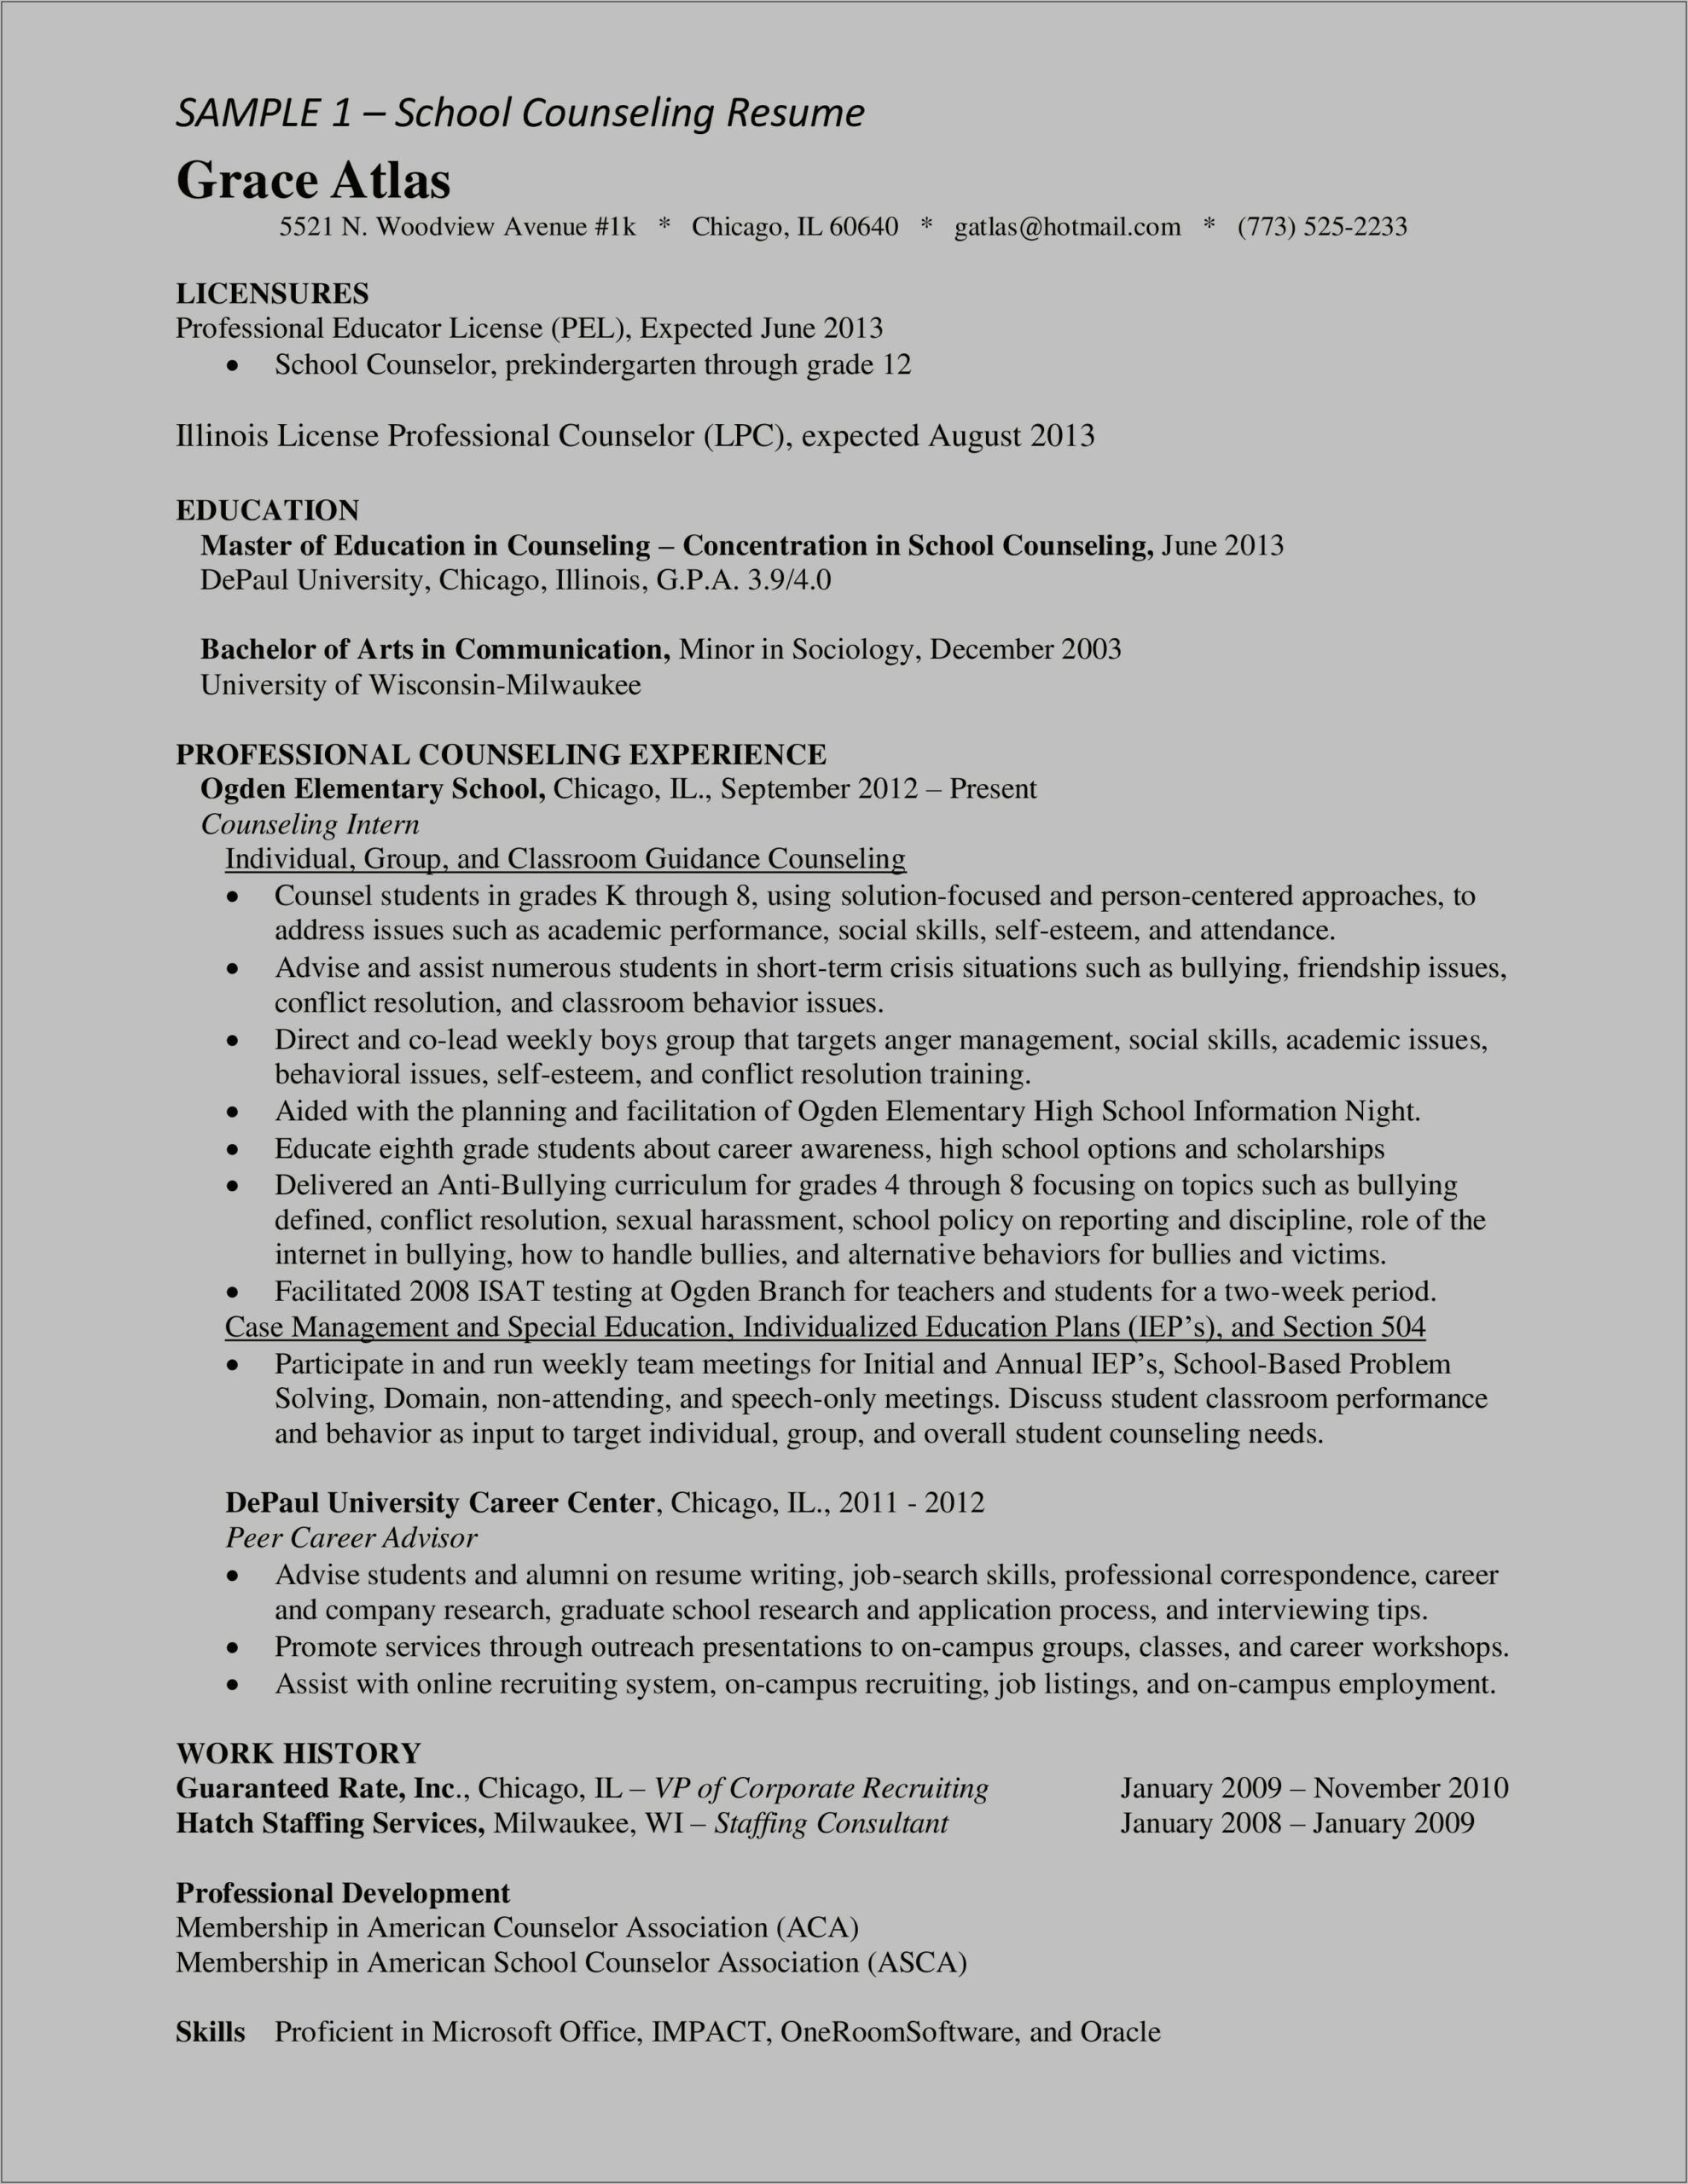 High School Resume To Give To School Counselor